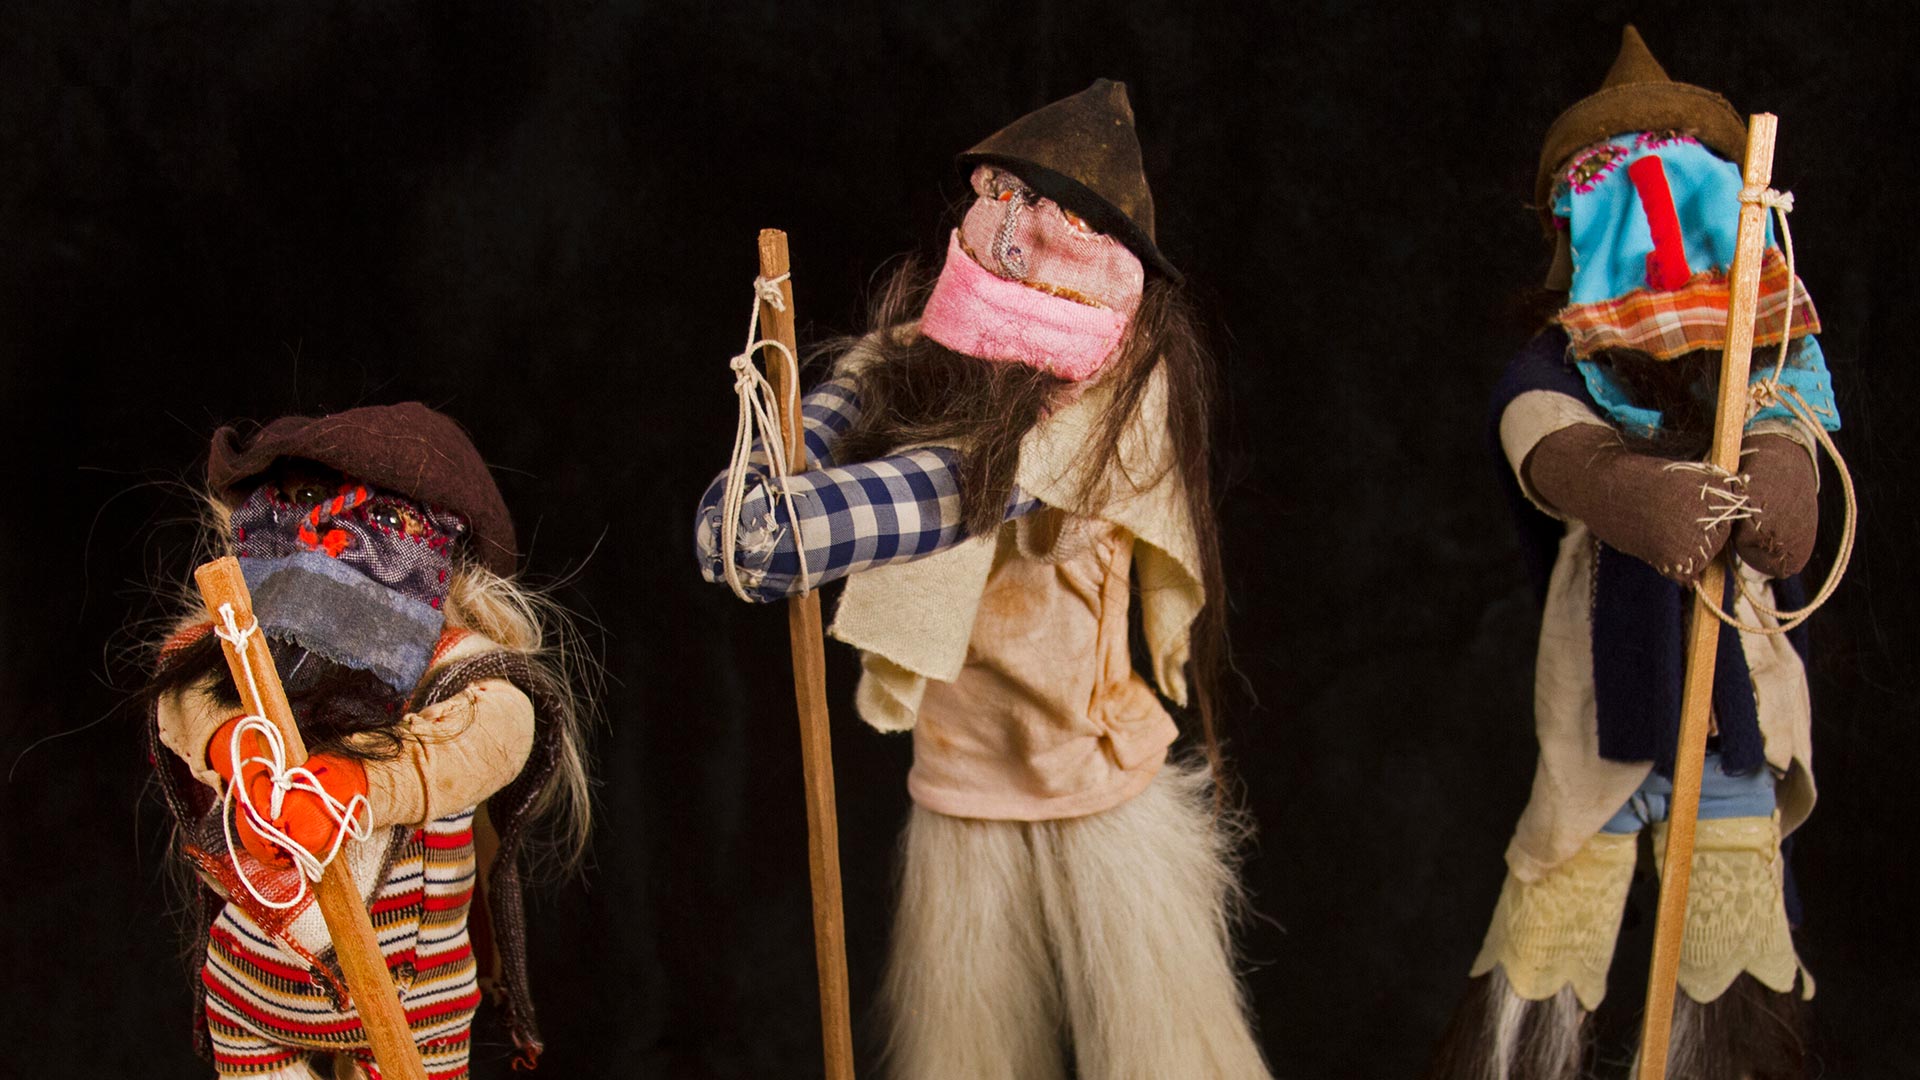 three faceless dolls made of mismatched fabrics, holding brooms